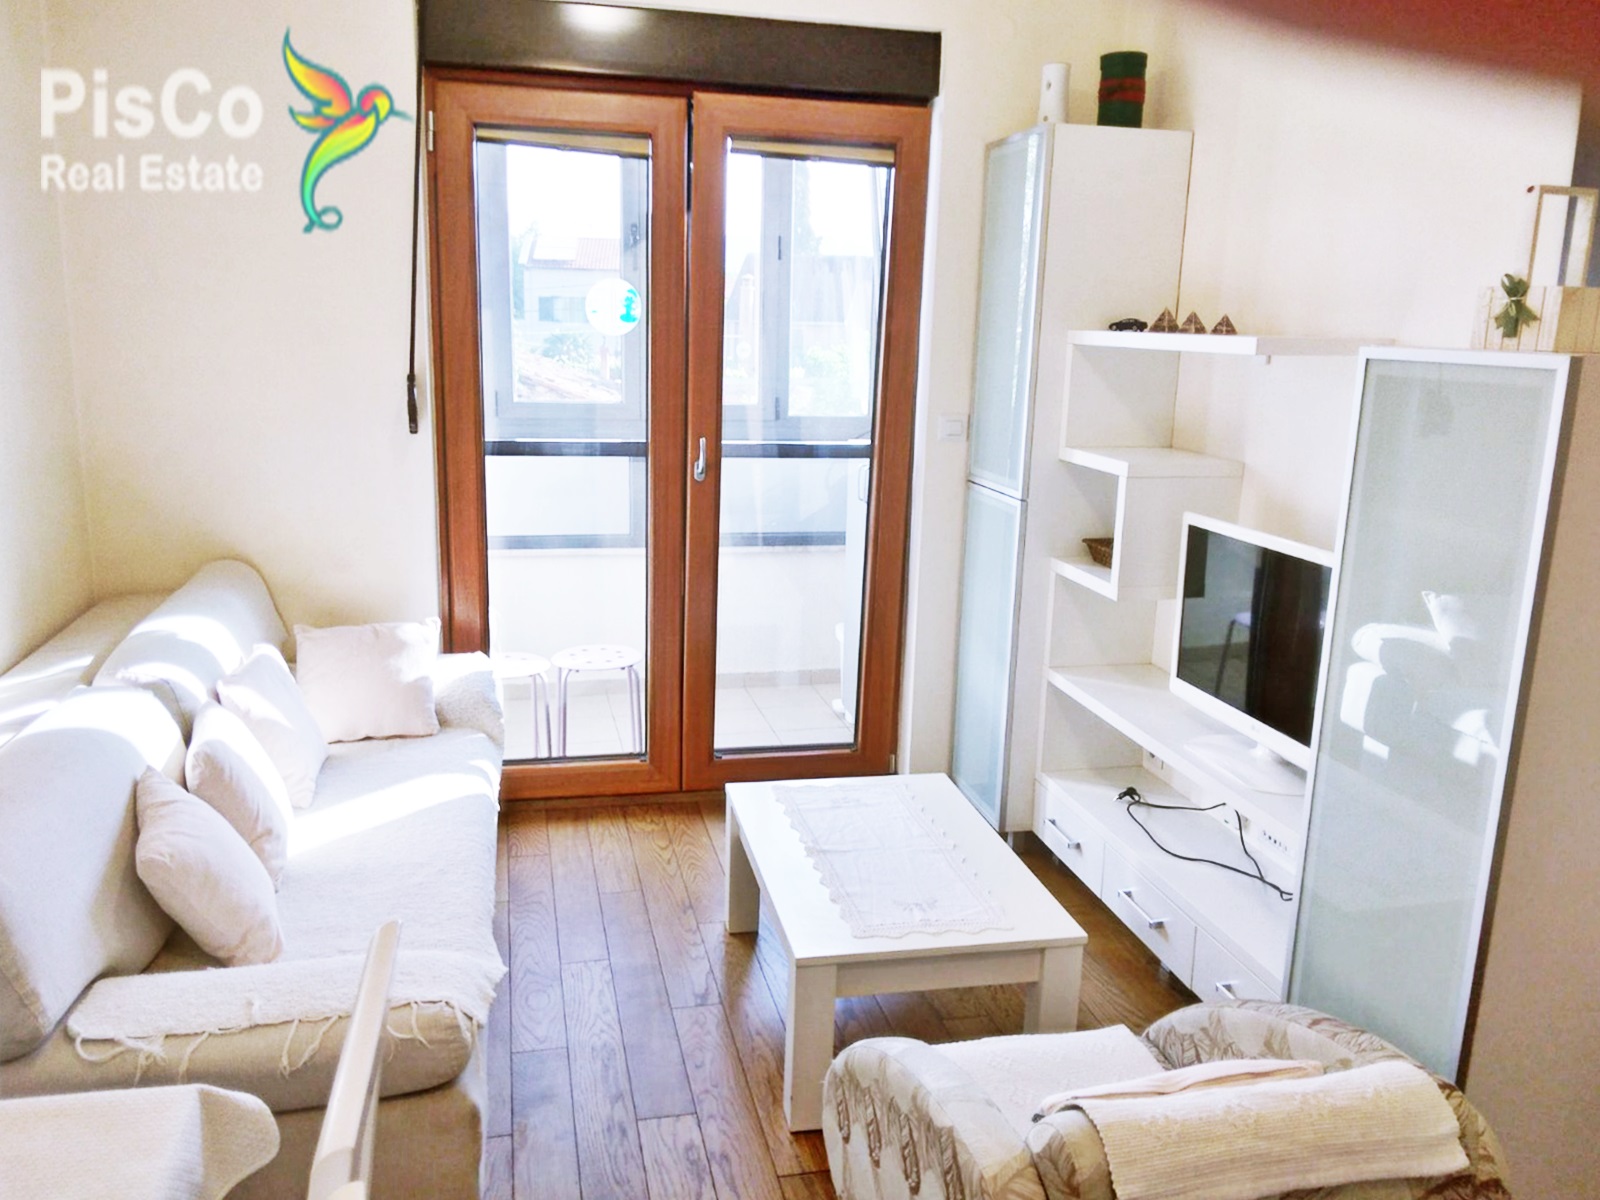 FOR RENT Nicely furnished small one bedroom apartment under Ljubović 33m2 + Parking space